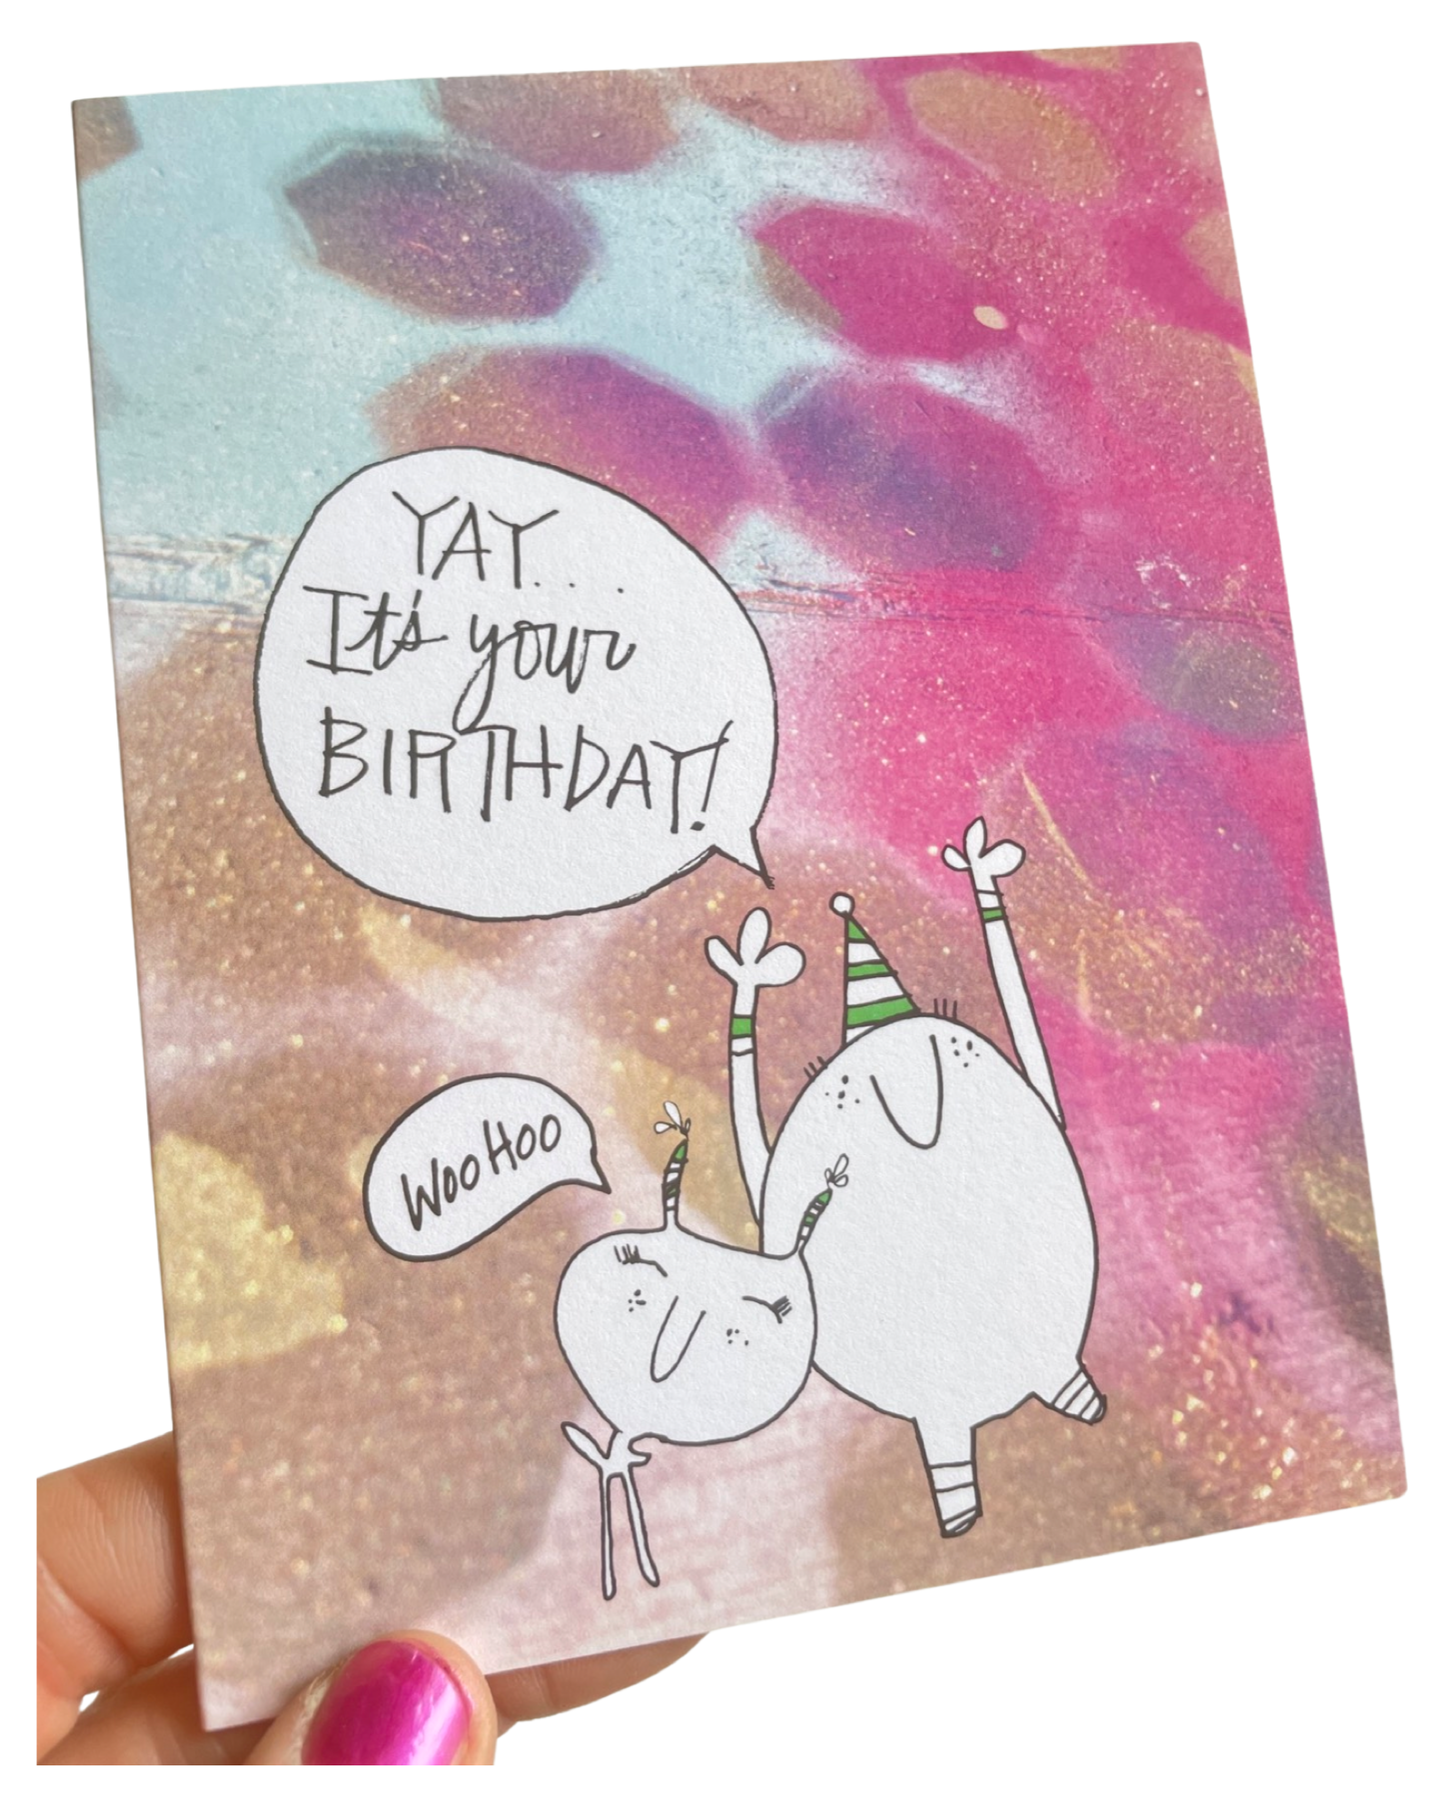 Yay It's your birthday greeting card